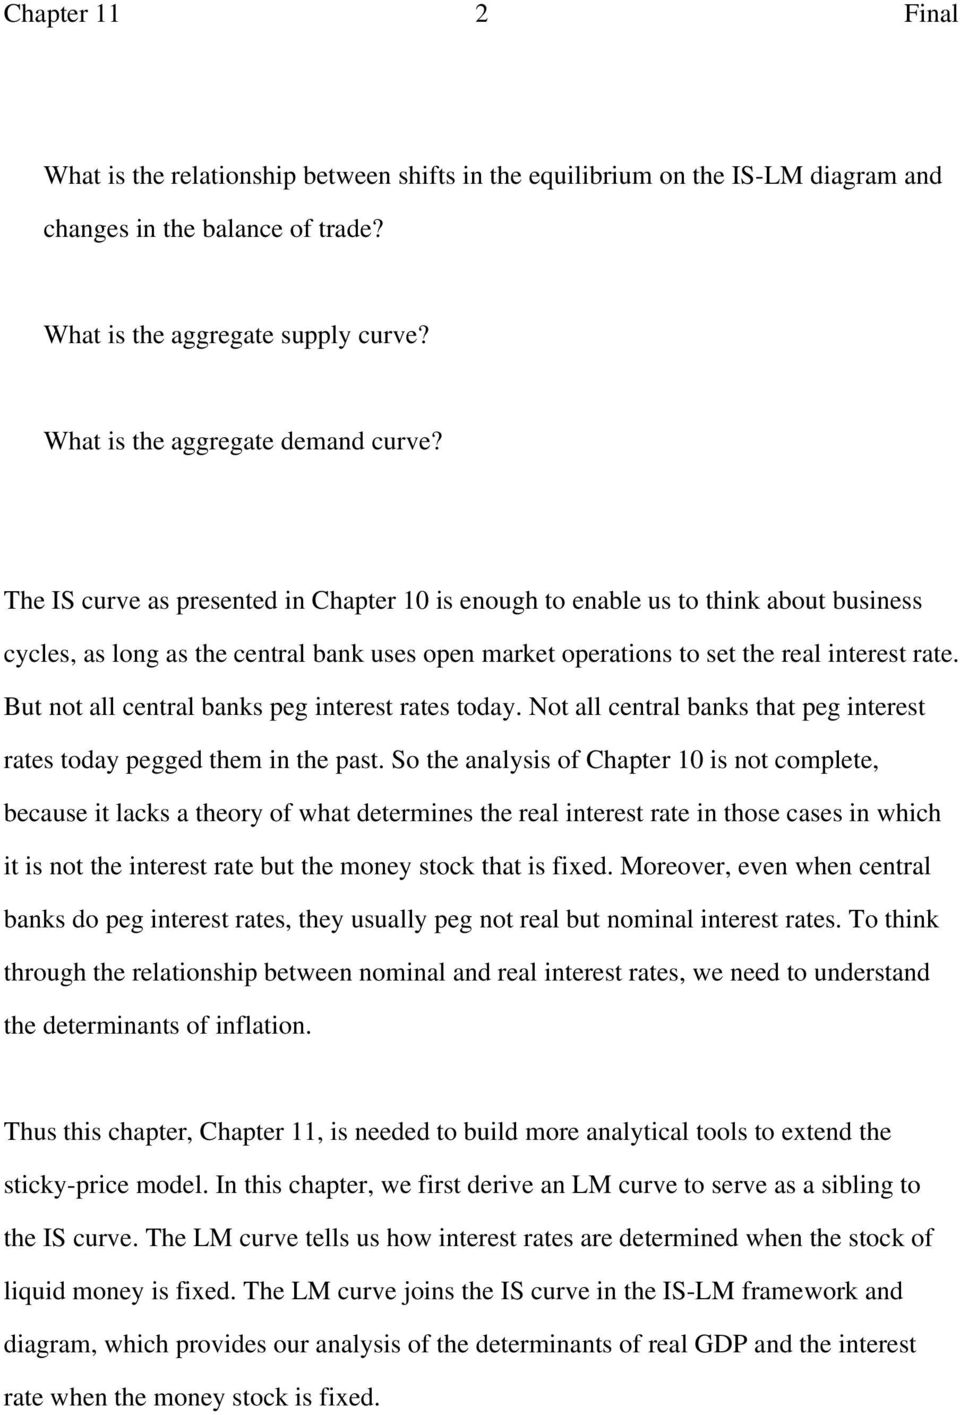 The IS curve as presented in Chapter 10 is enough to enable us to think about business cycles, as long as the central bank uses open market operations to set the real interest rate.